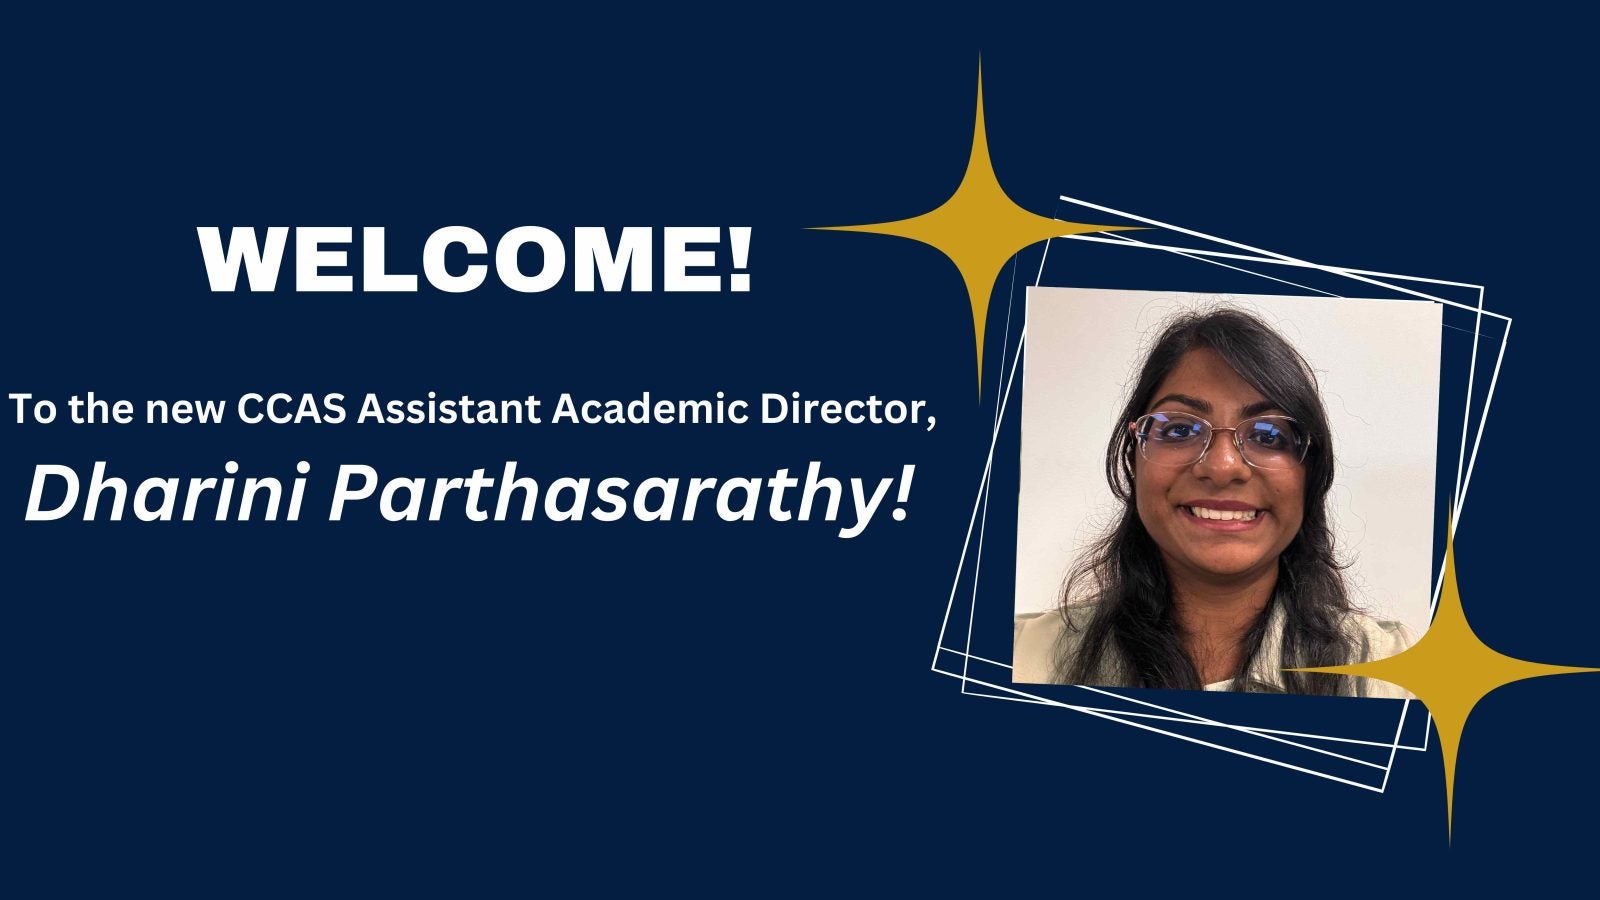 Welcome to the new CCAS Assistant Academic Director, Dharini Parthasarathy!